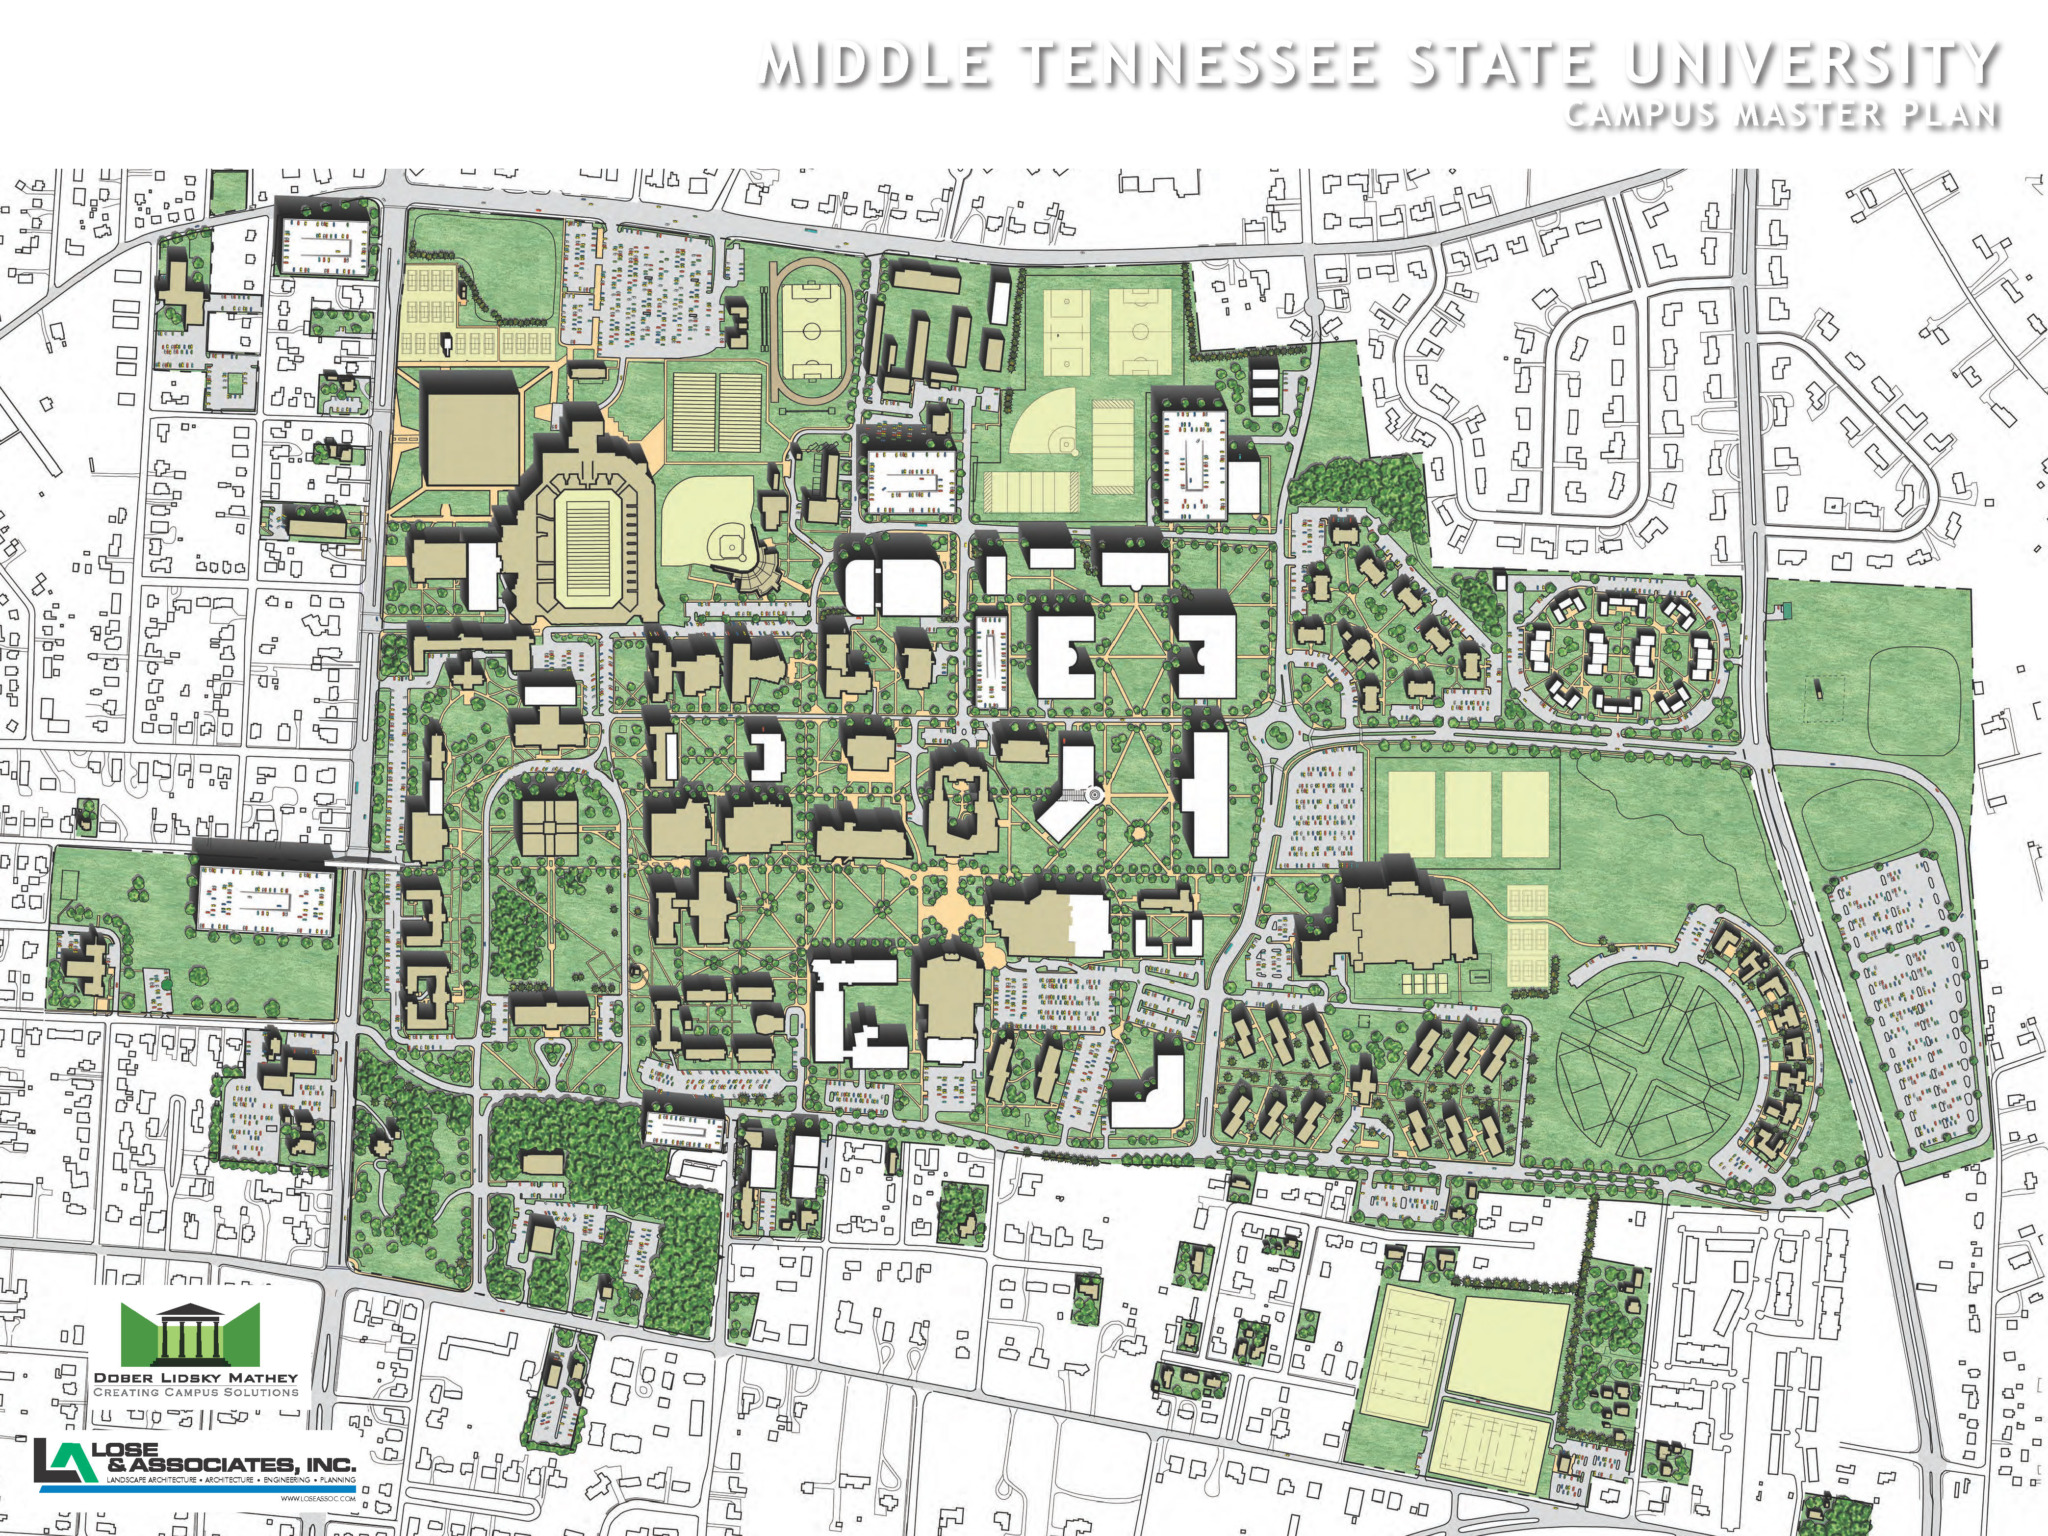 Middle Tennessee State University Master Plan - Lose Design